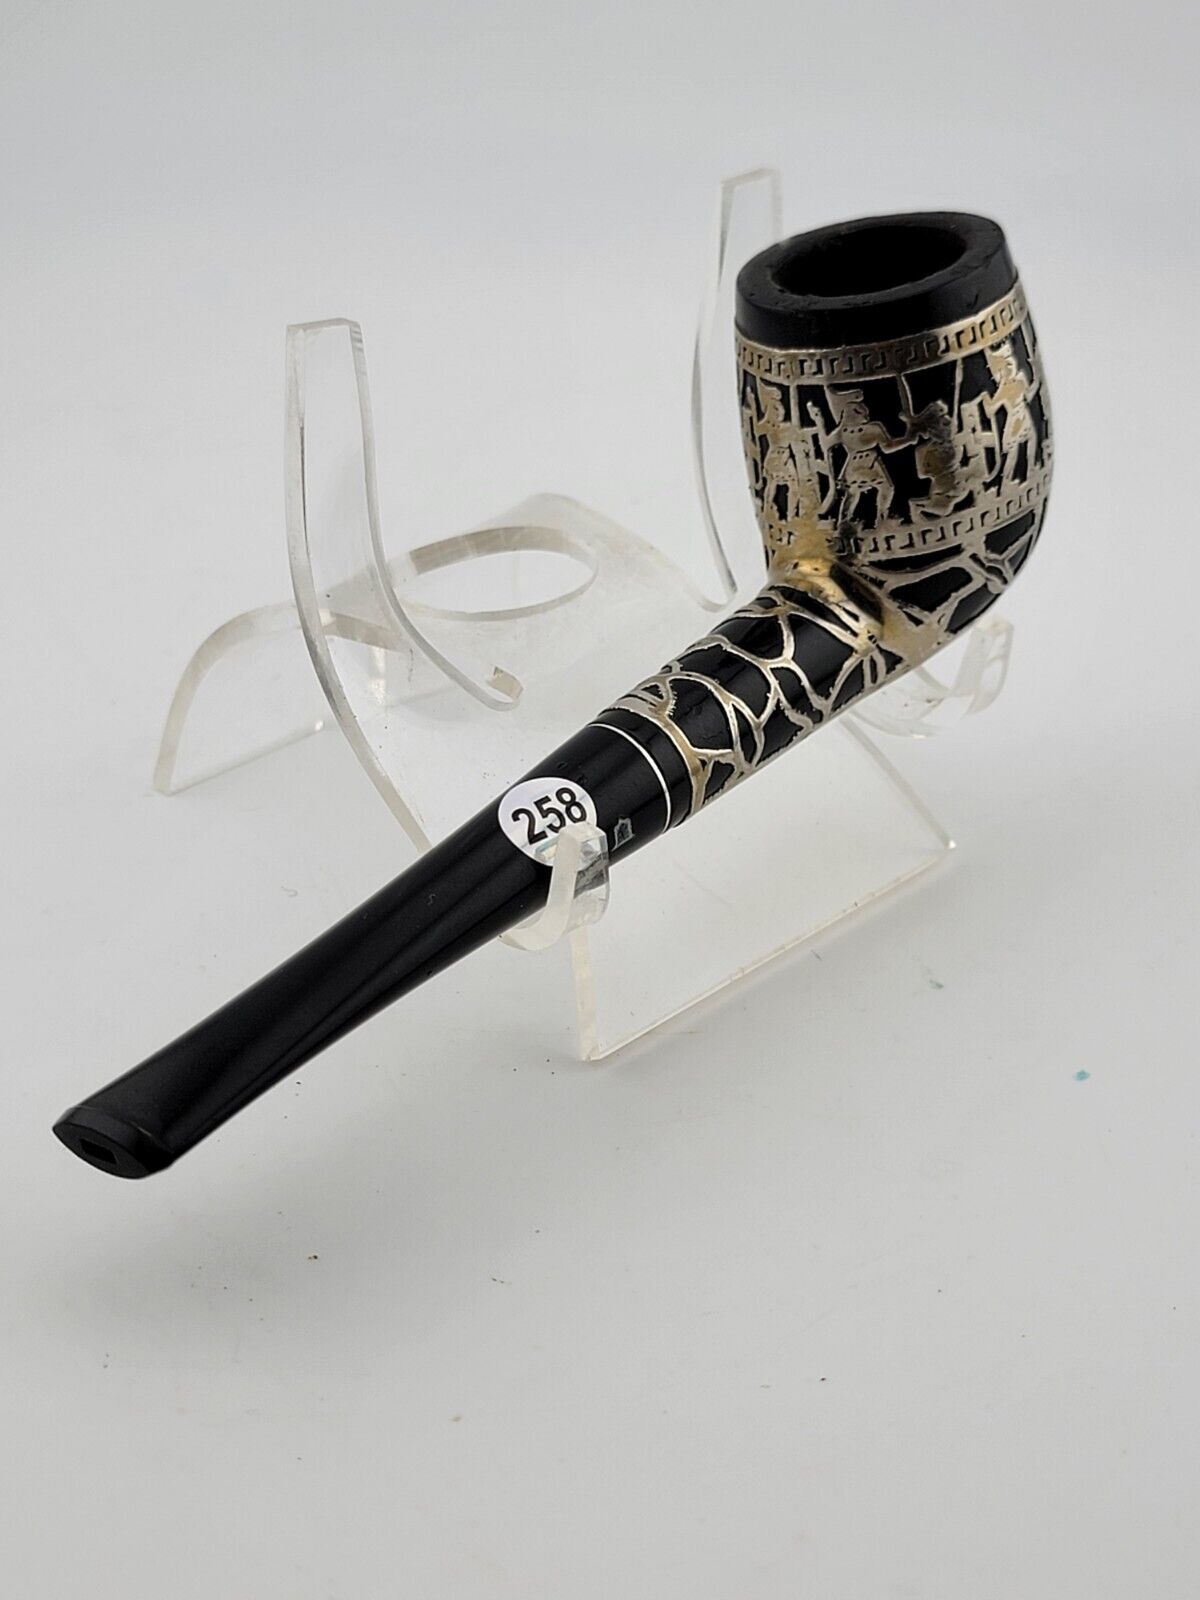 Vintage Sterling Silver 925 Overlay Tobacco Pipe MEDICO, Aztec Warrior Themed